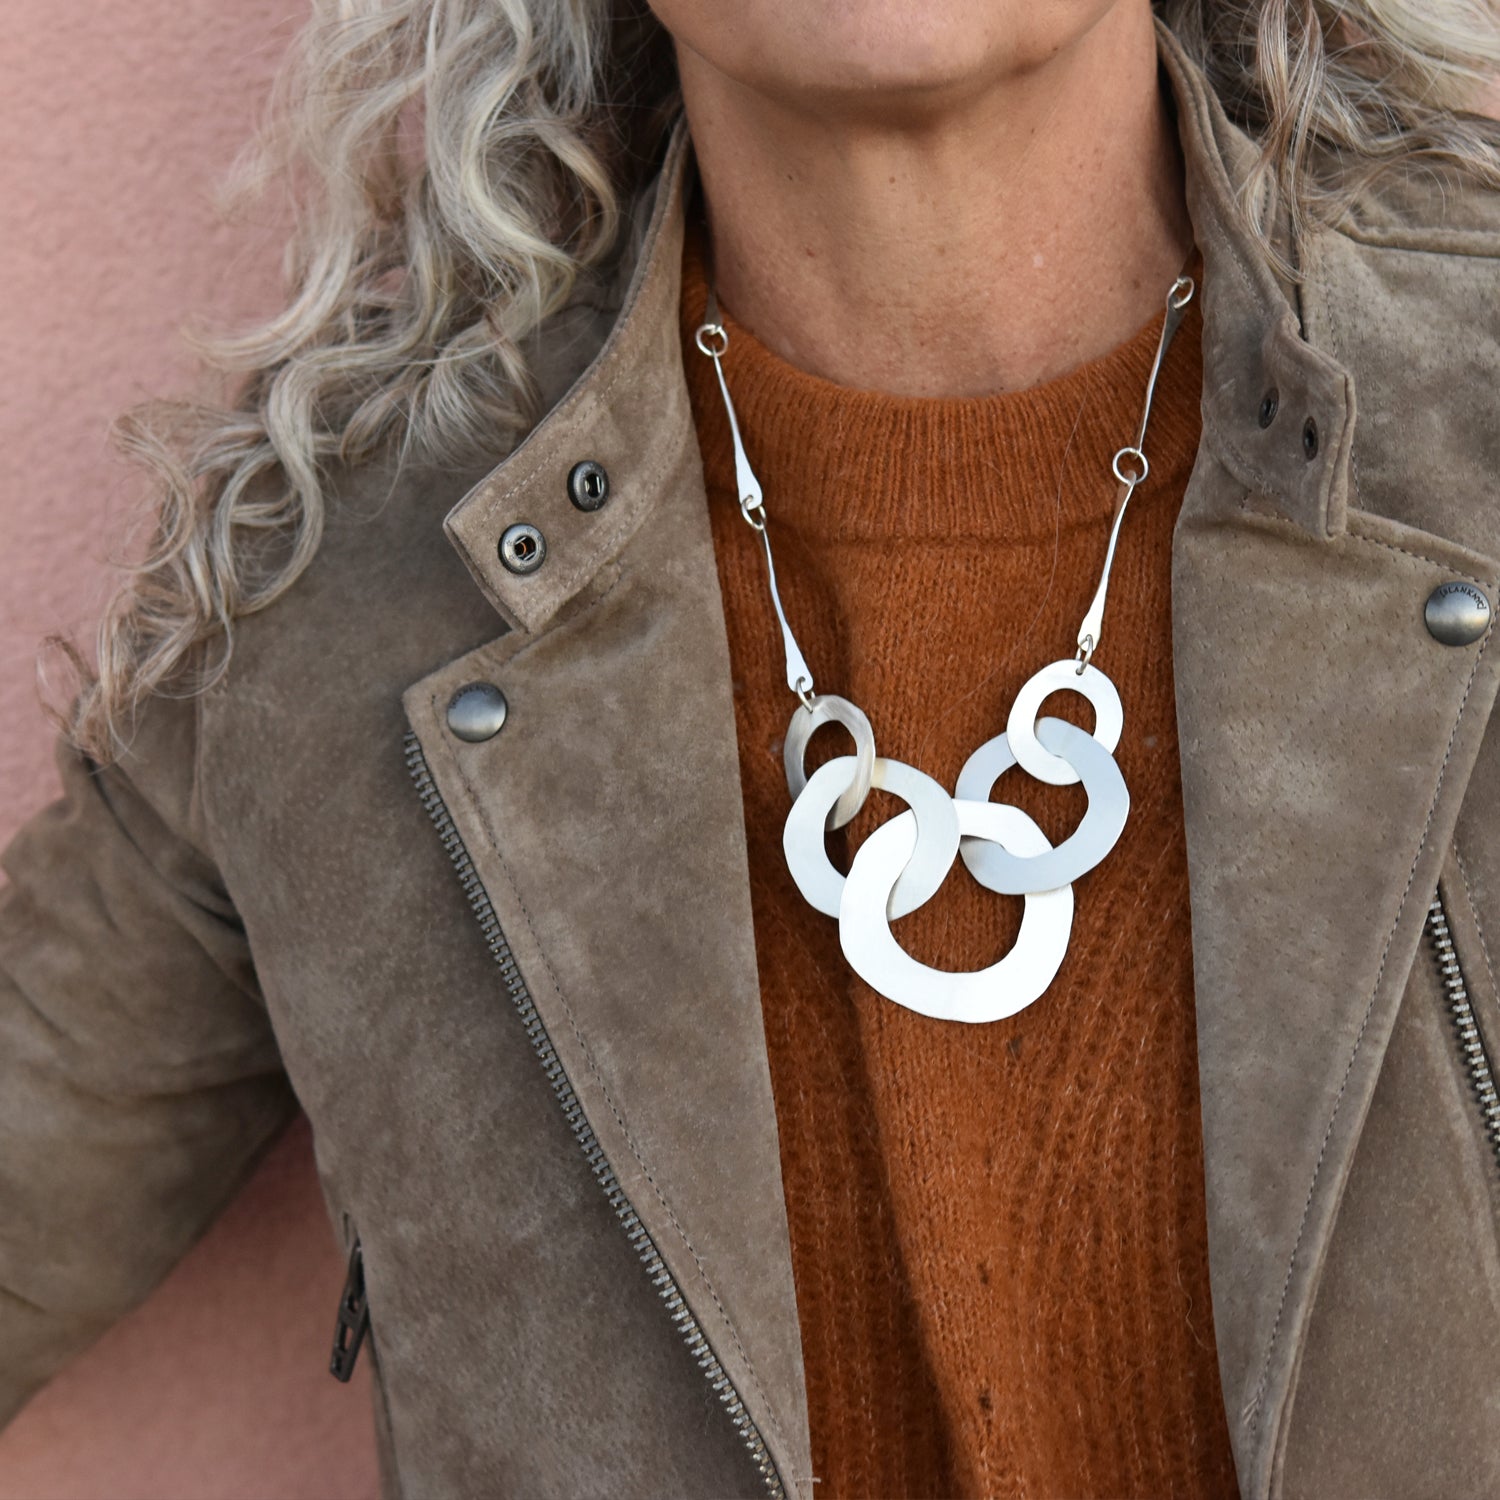 Five Ring Cut Out Necklace